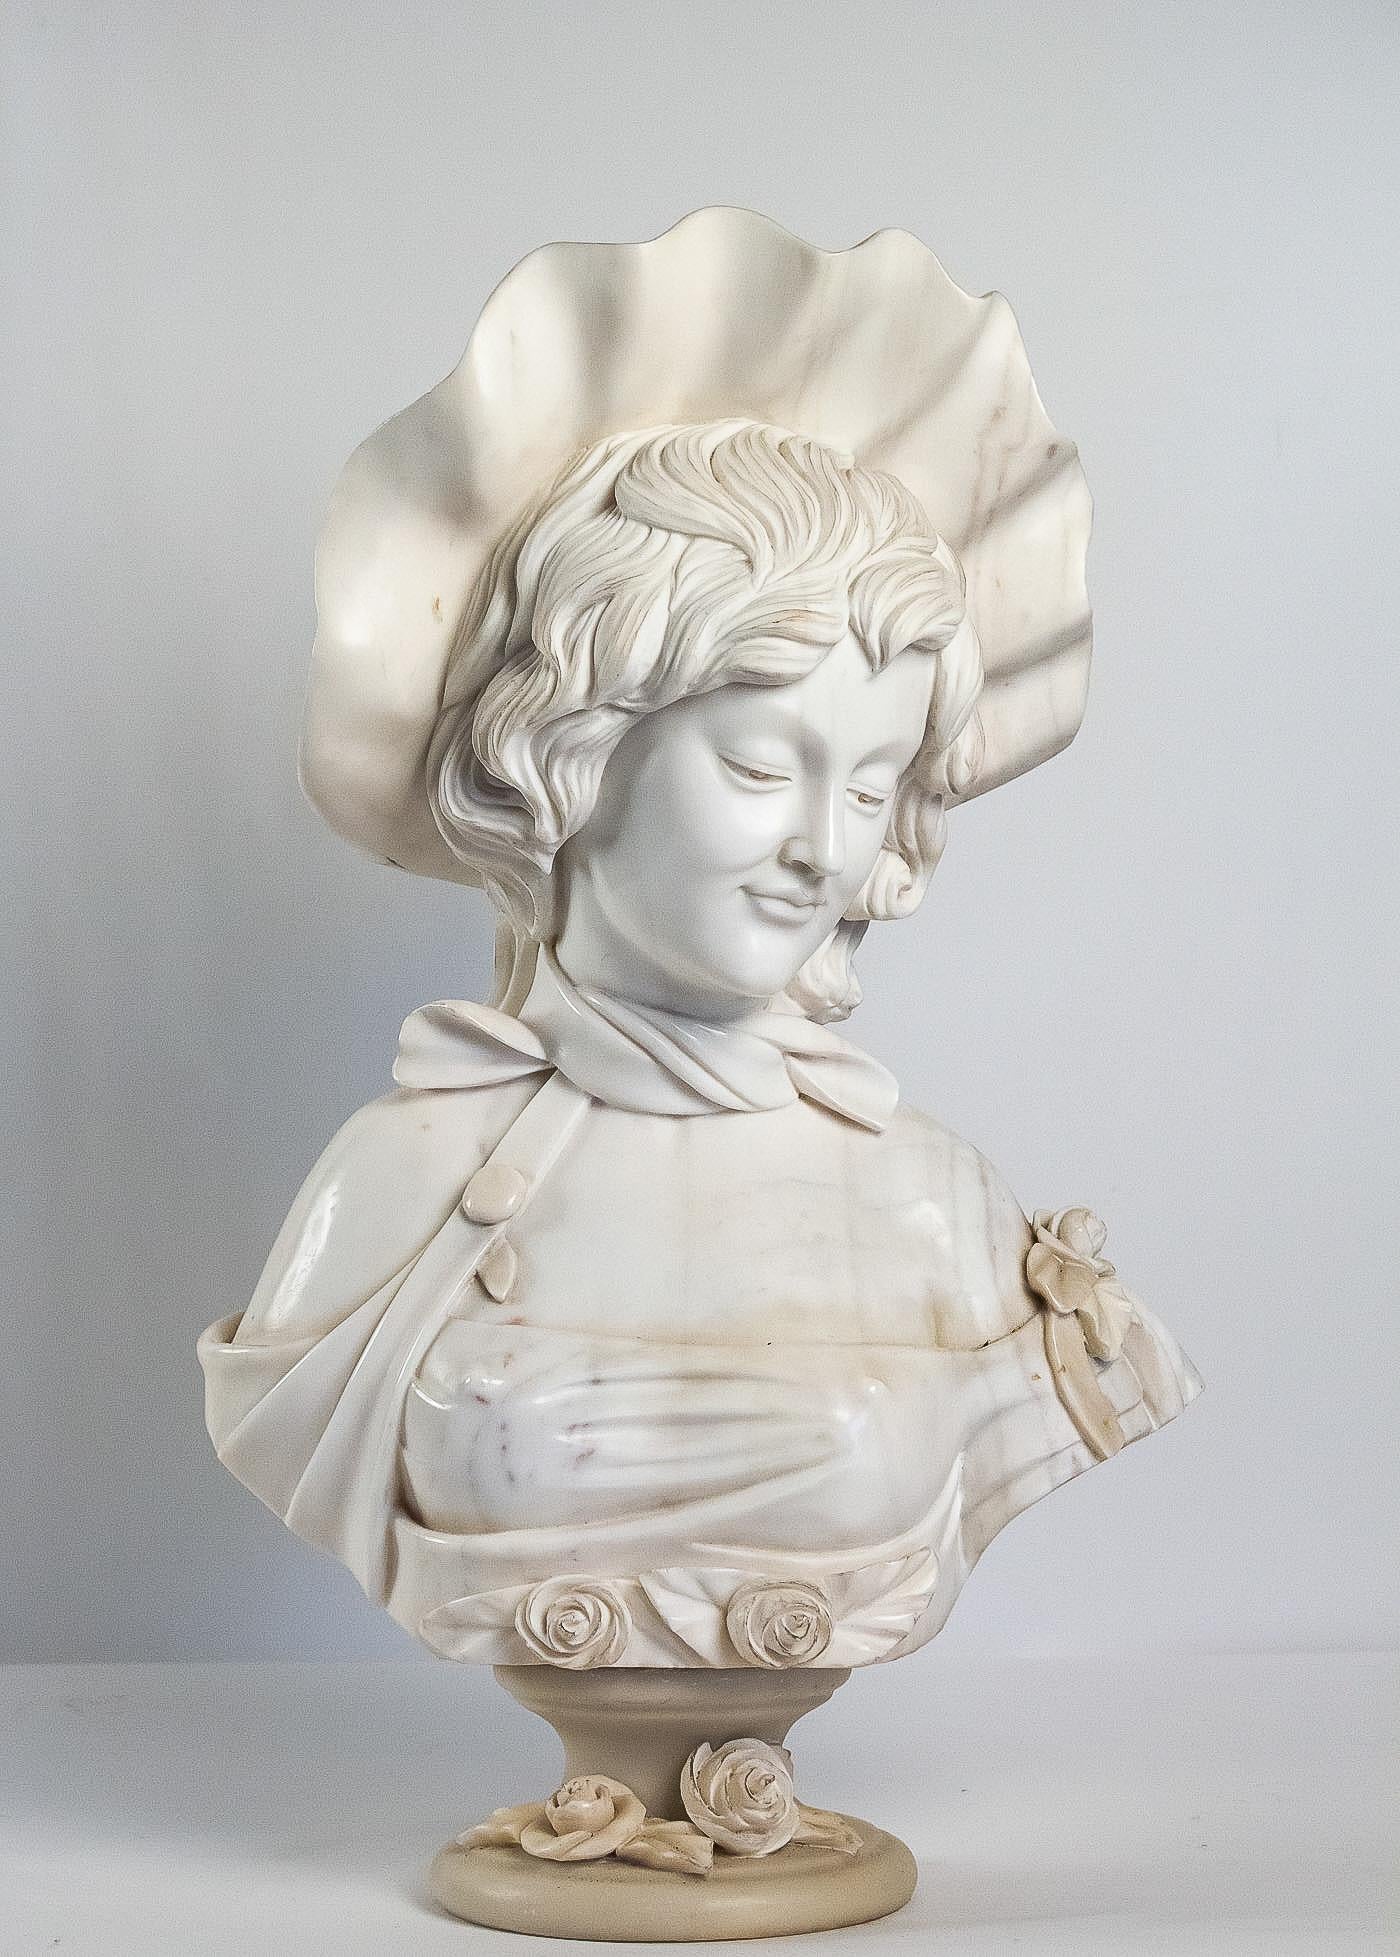 French School white Carrara marble bust a French elegant woman, circa 1900.

Much quality in this beautiful and decorative white Carrara marble sculpture depicting the bust of an elegant woman late 19th century or early 20th century.
The